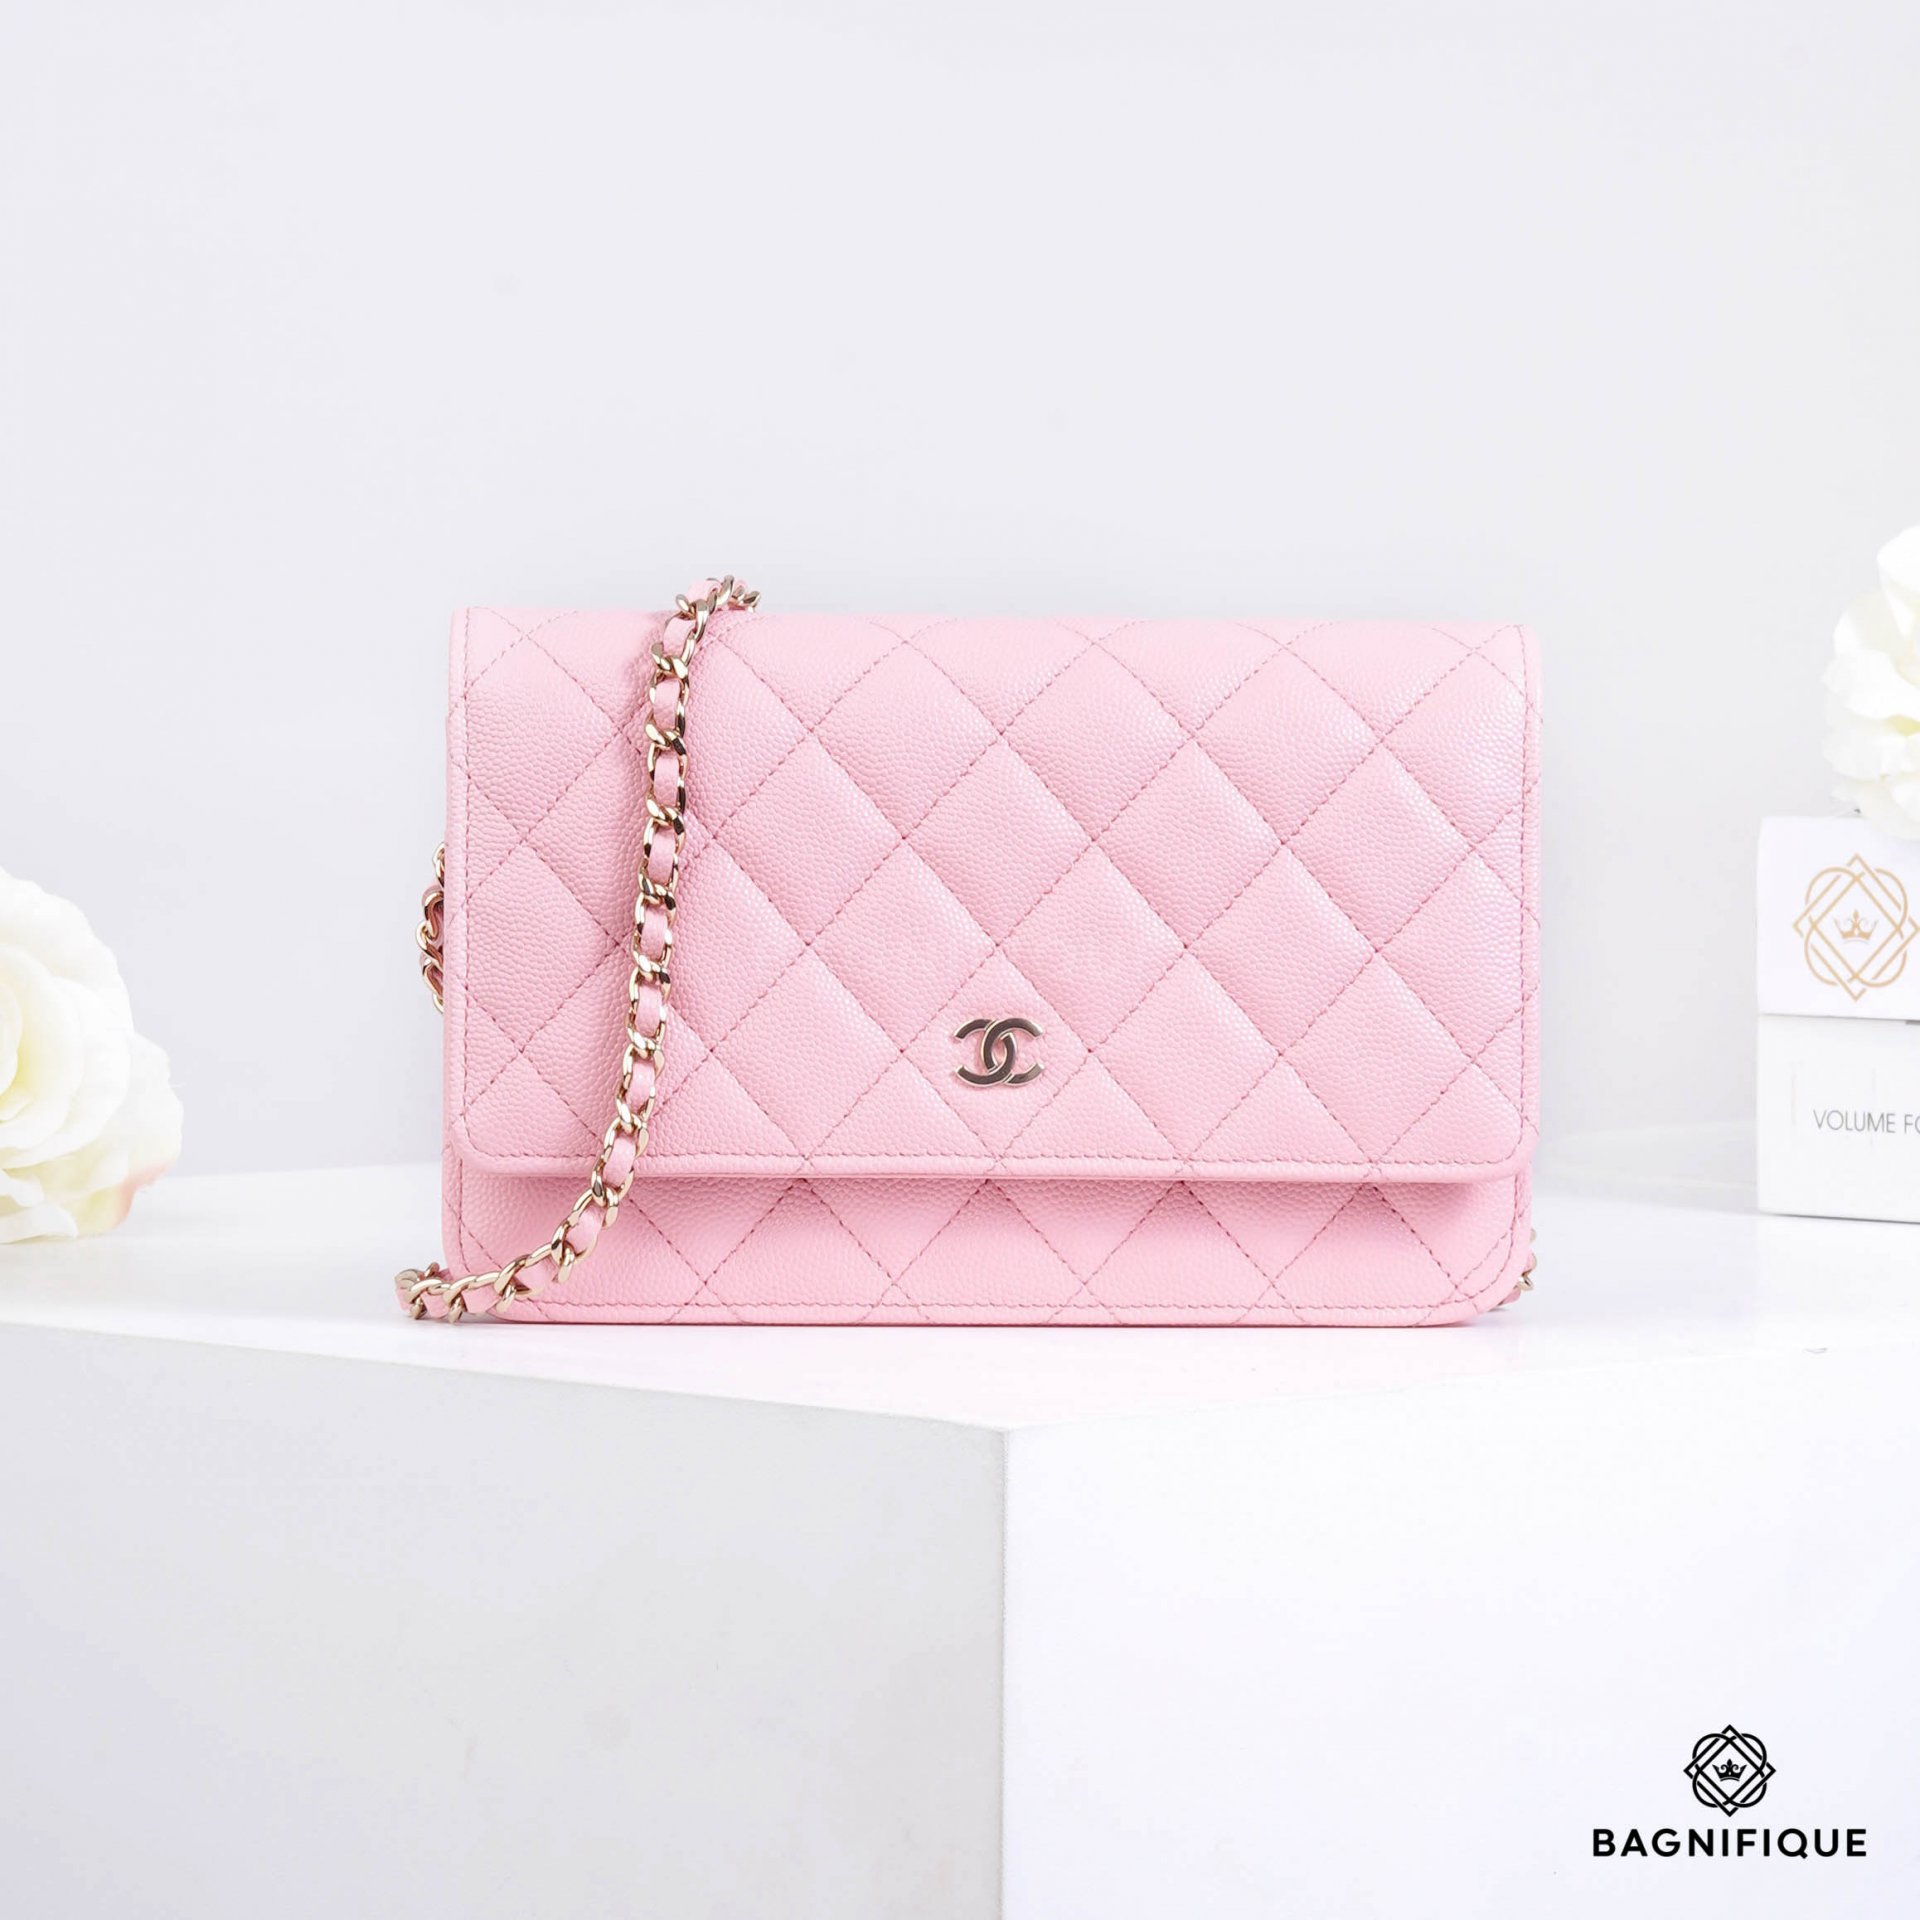 CHANEL WOC BABY PINK CAVIAR GHW MICRO